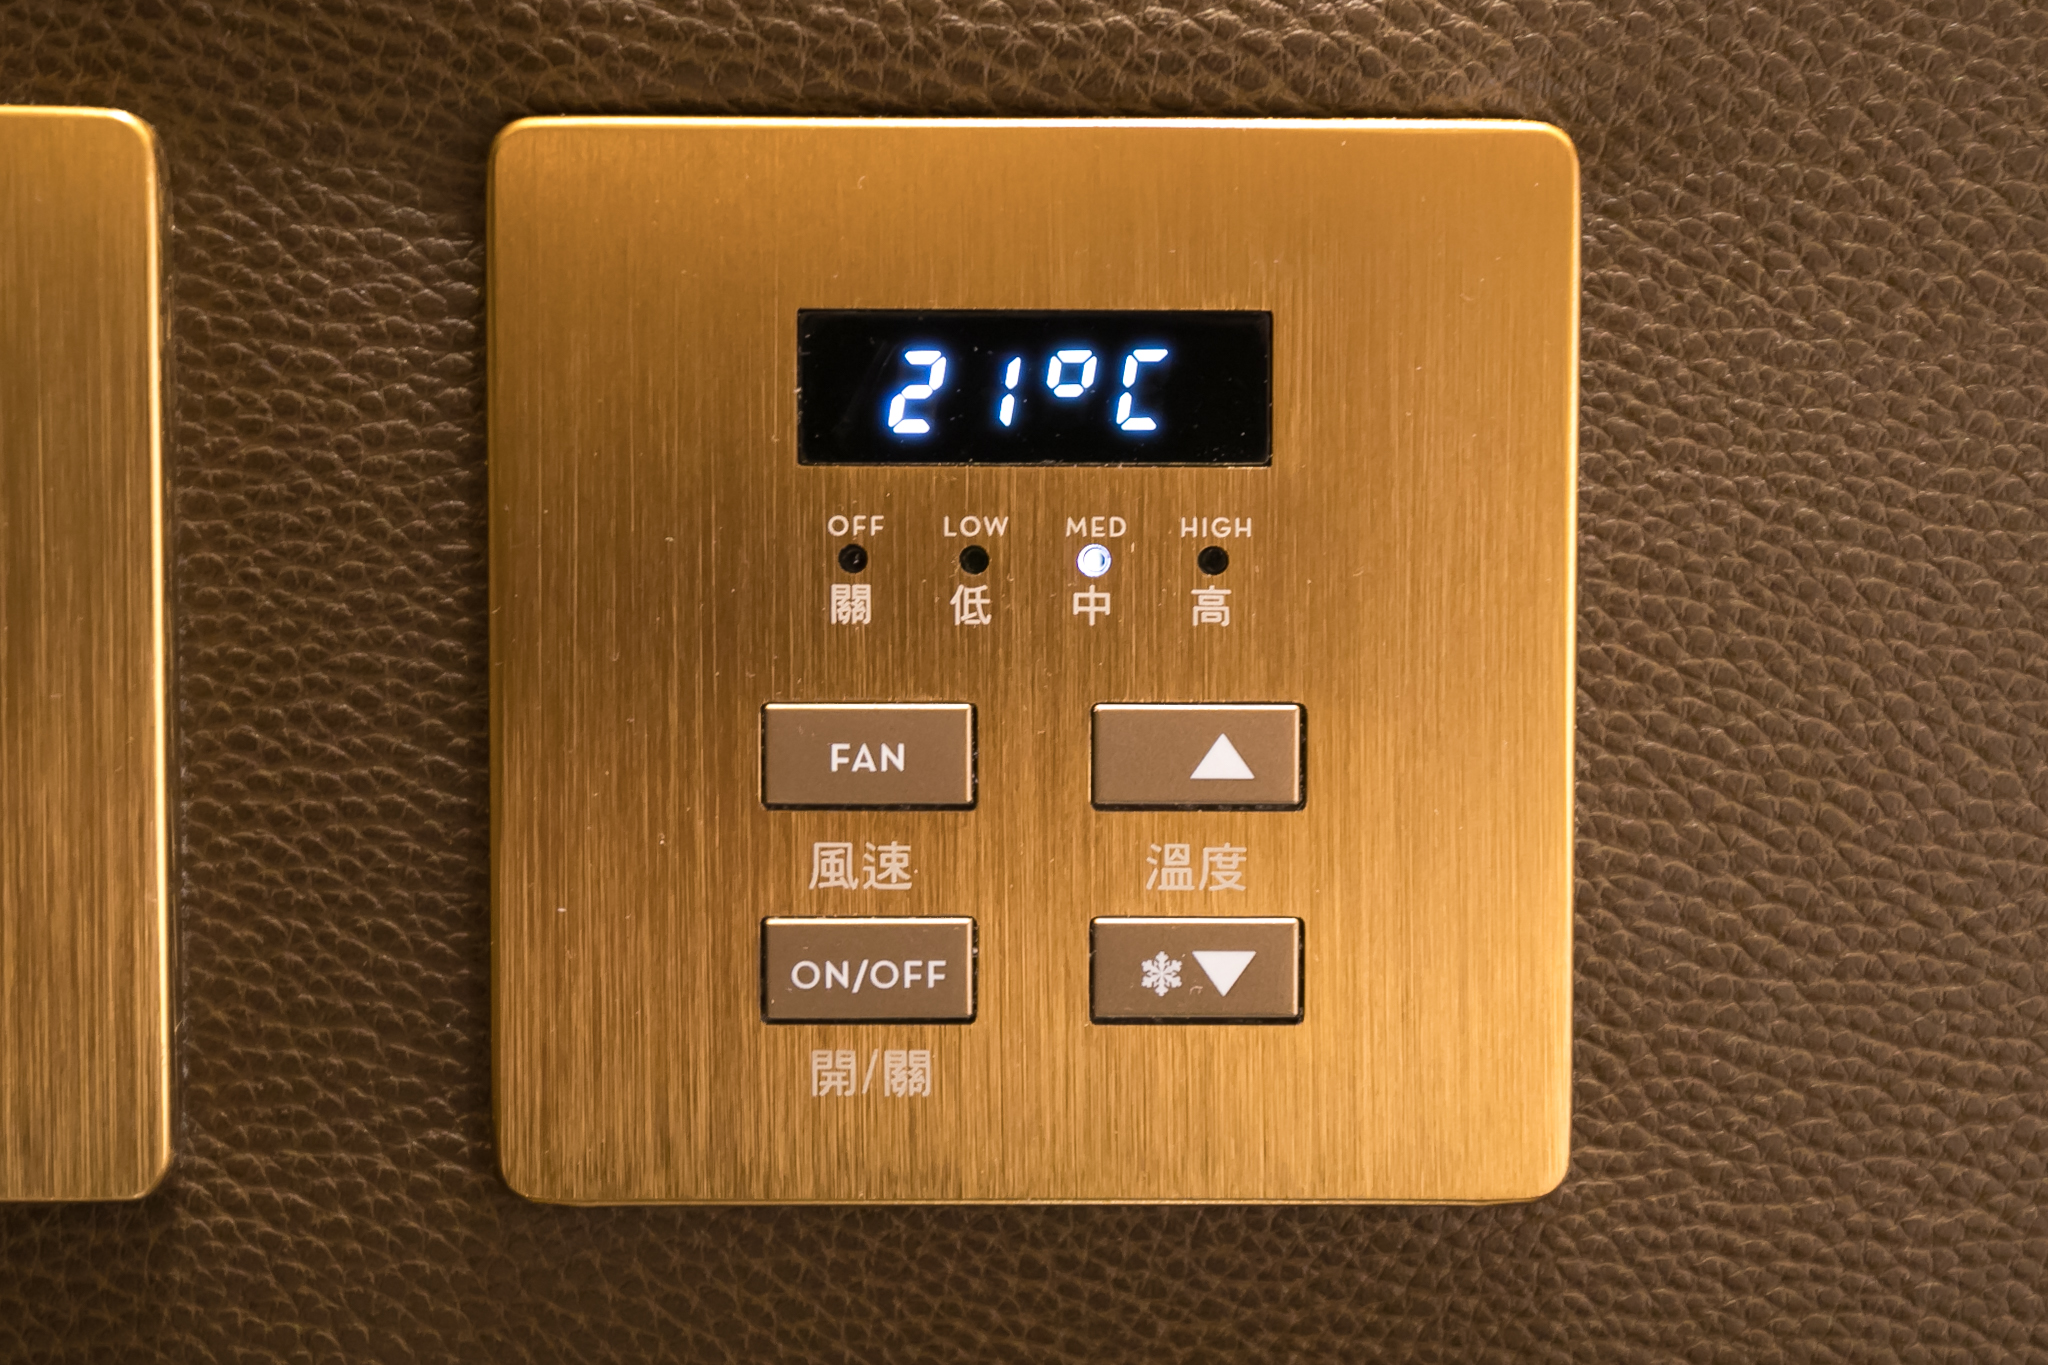 a gold square panel with buttons and a digital display